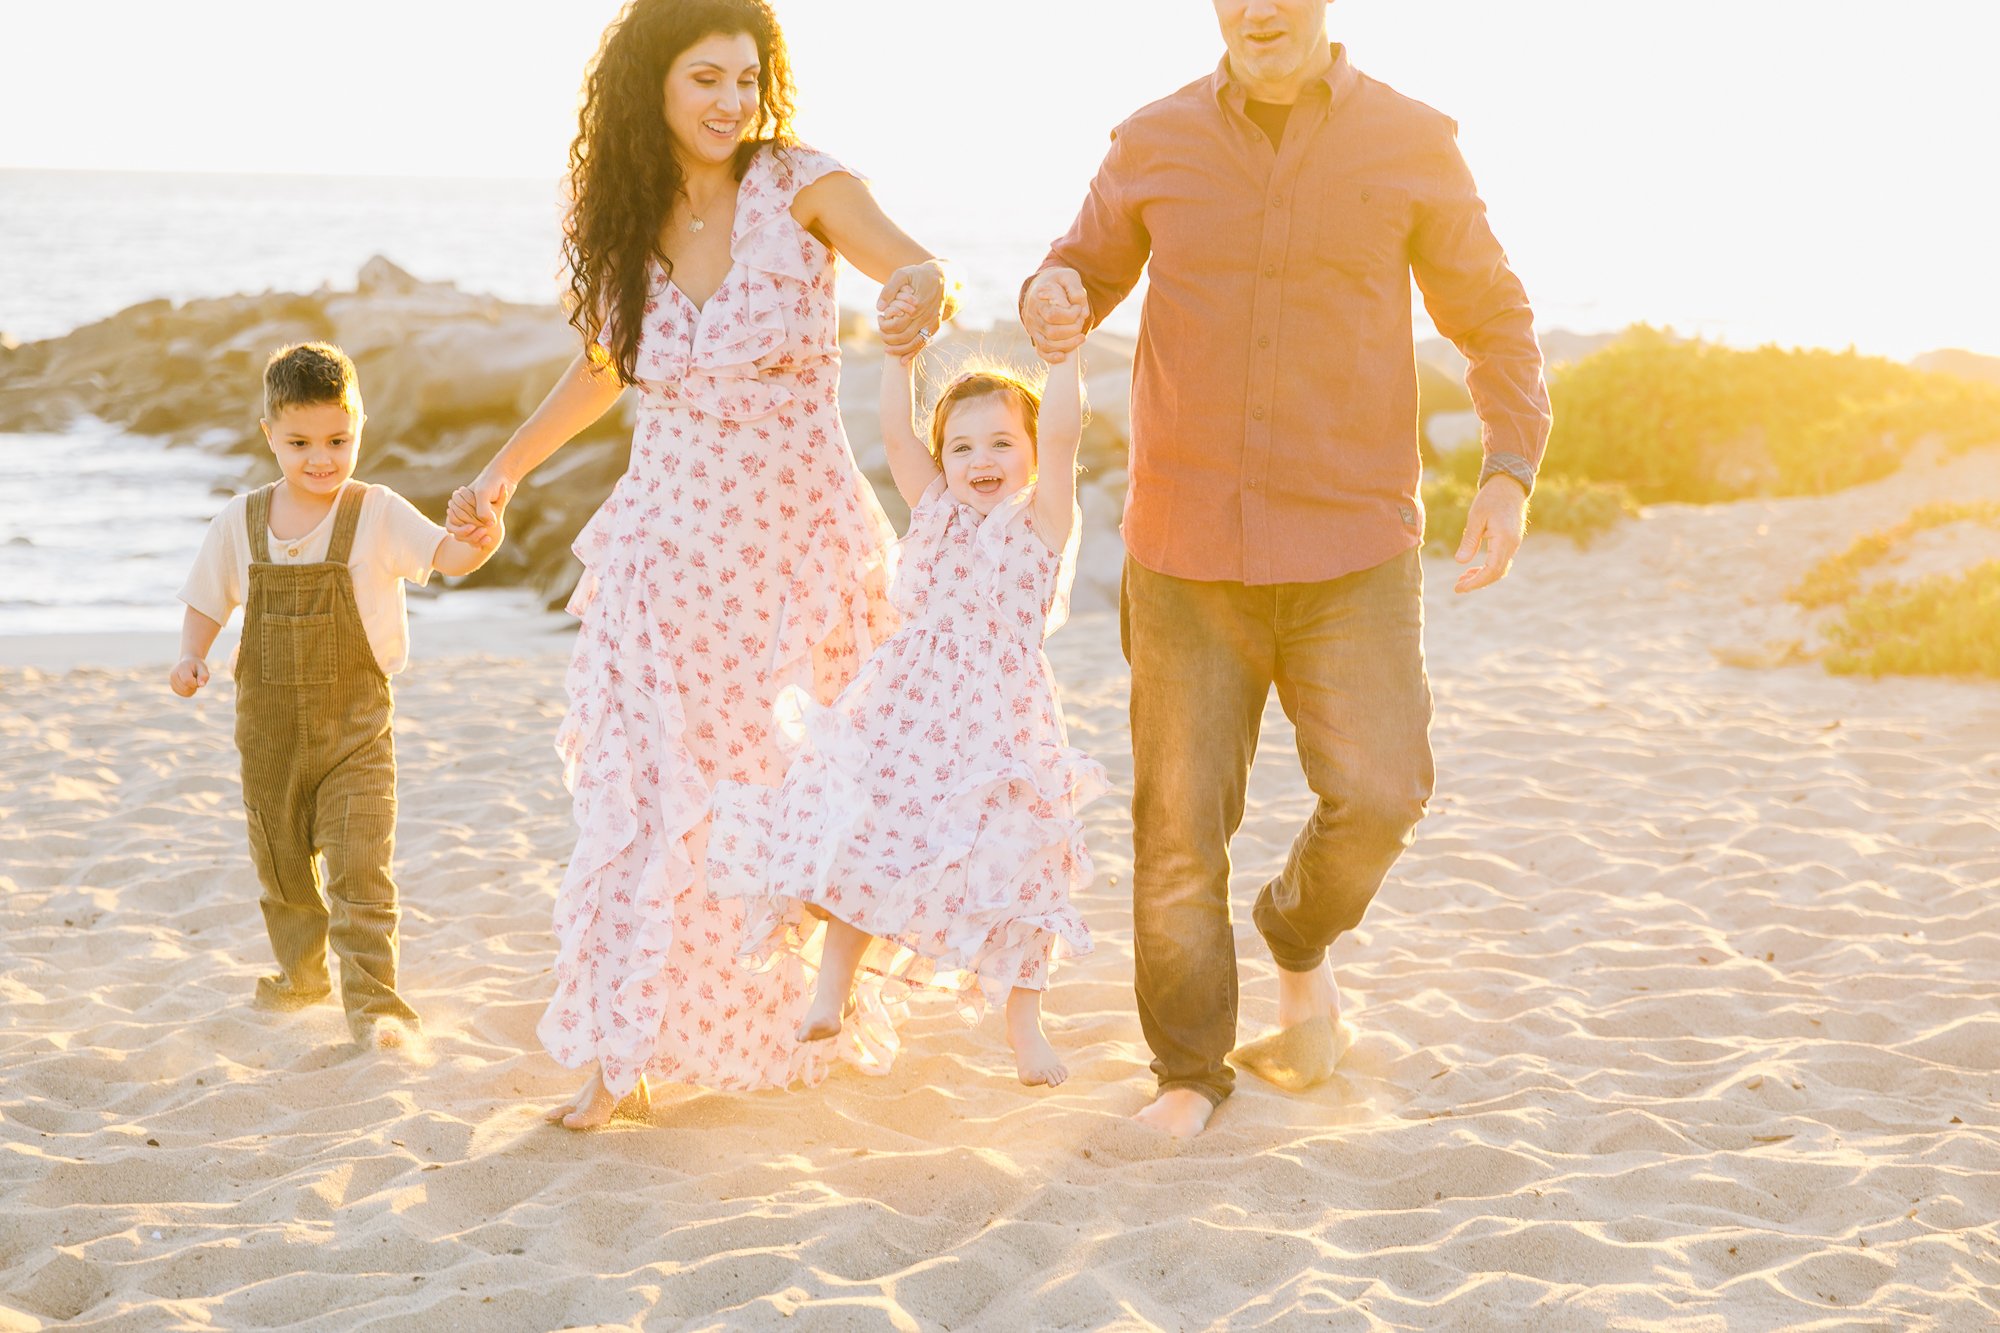 Los_Angeles_Family_Photographer_Mini_session_Golden_hour_Beach_Kid_Maternity_baby_Children_Holiday_Photography-2257.jpg